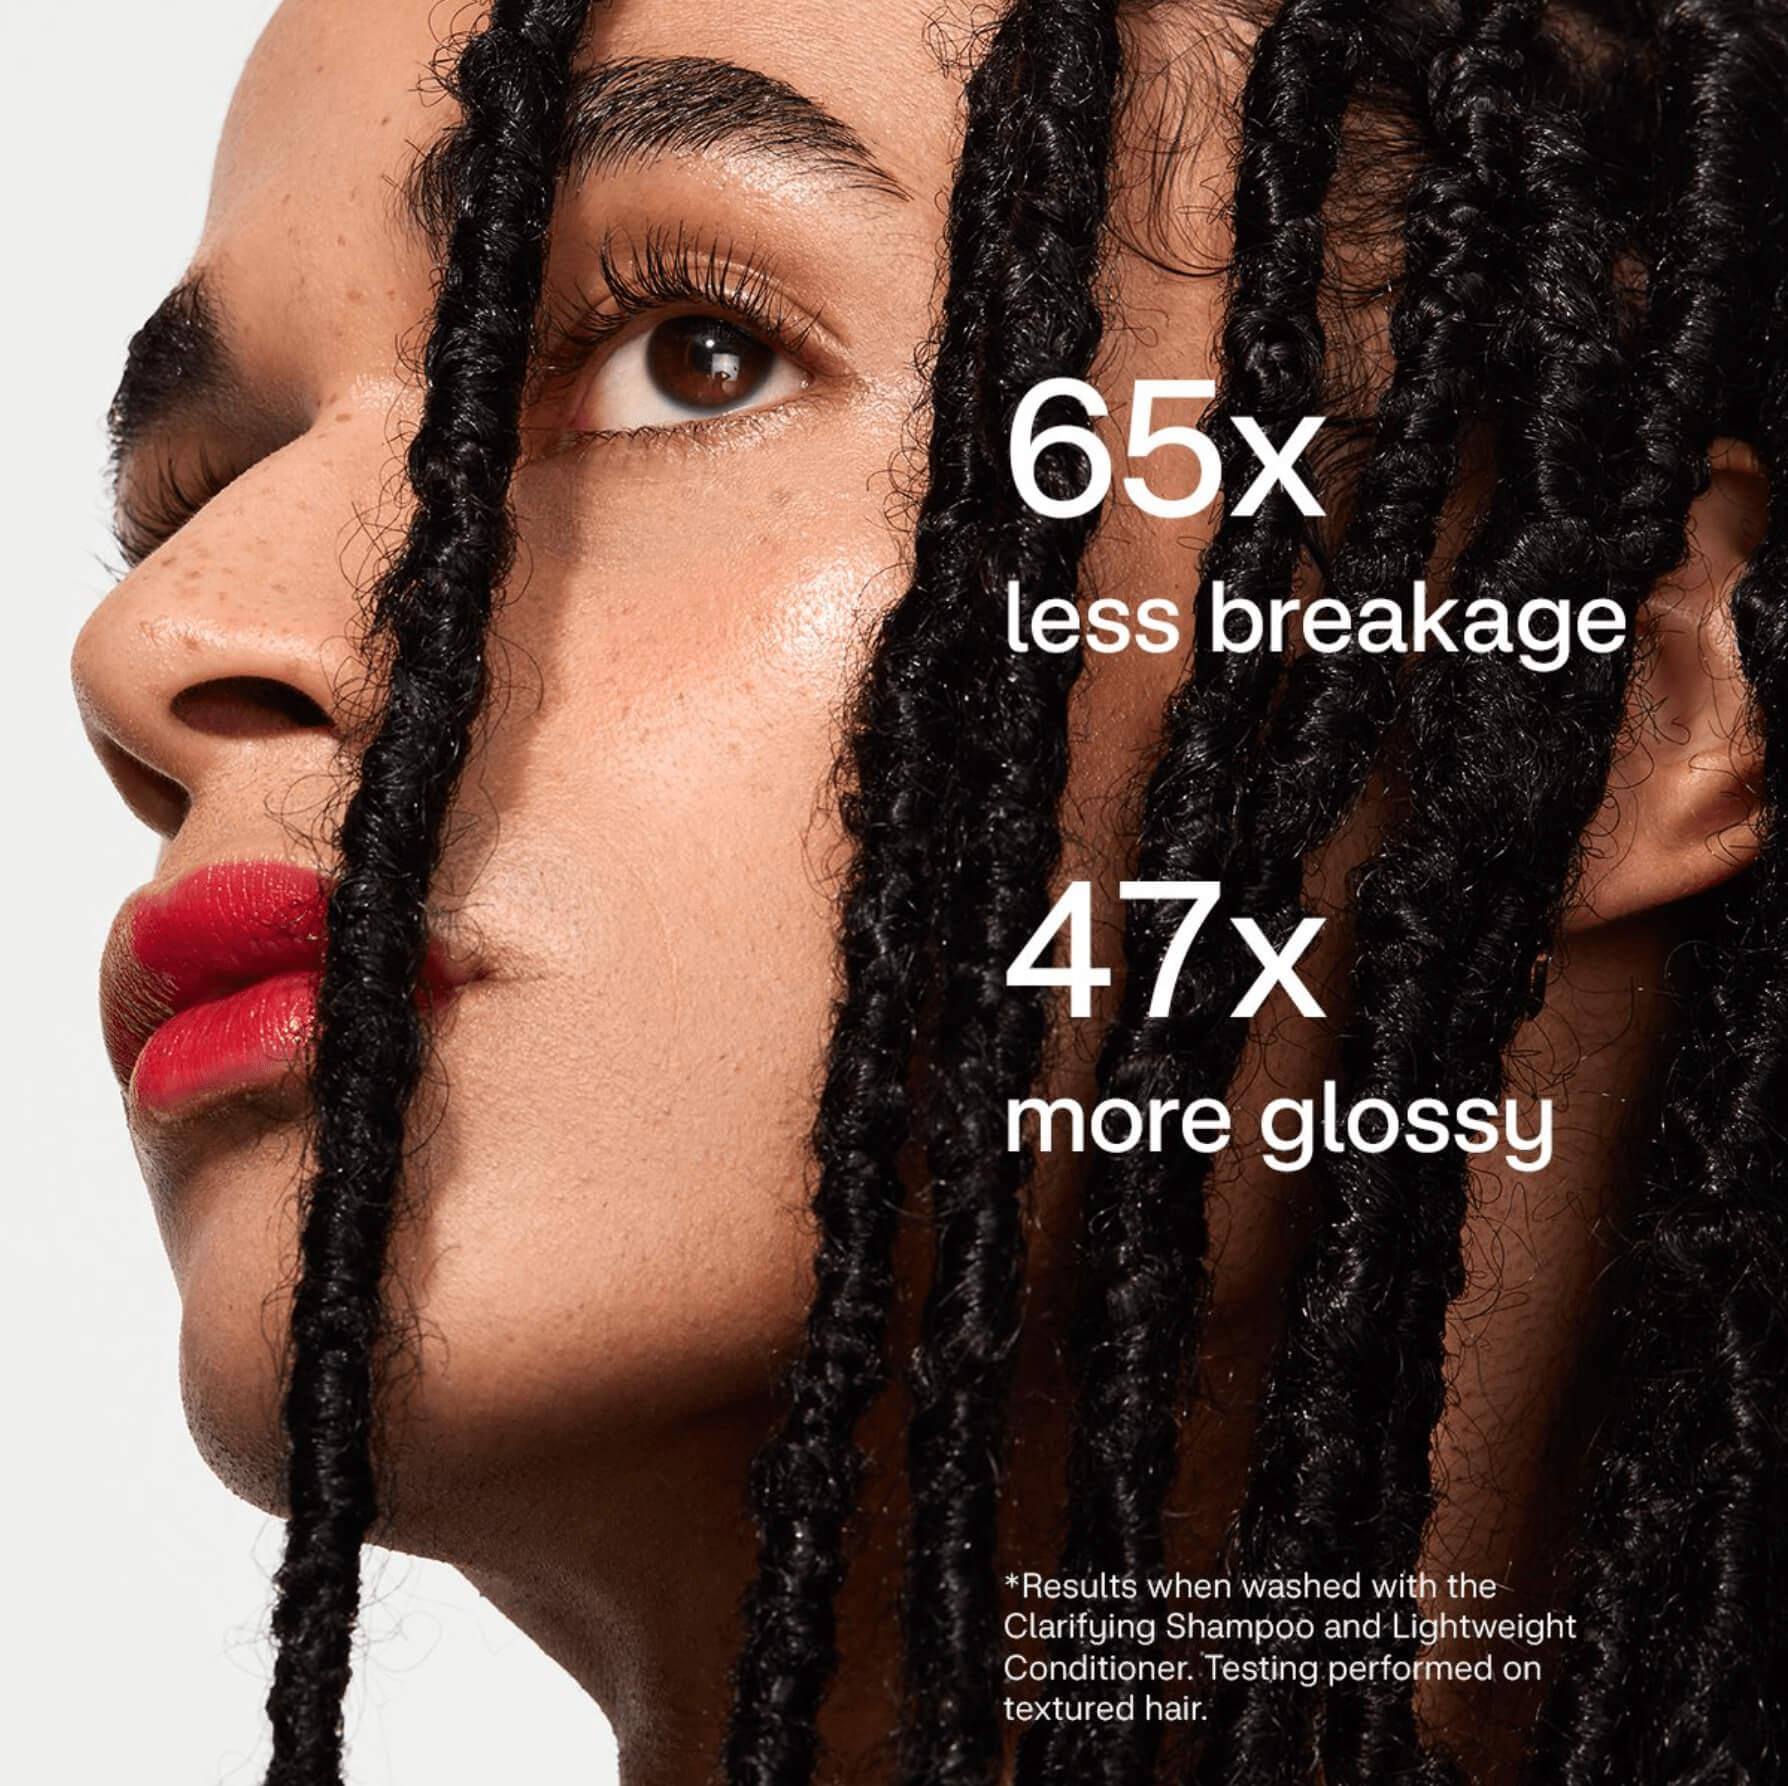 65X less breakage and 47X more glossy